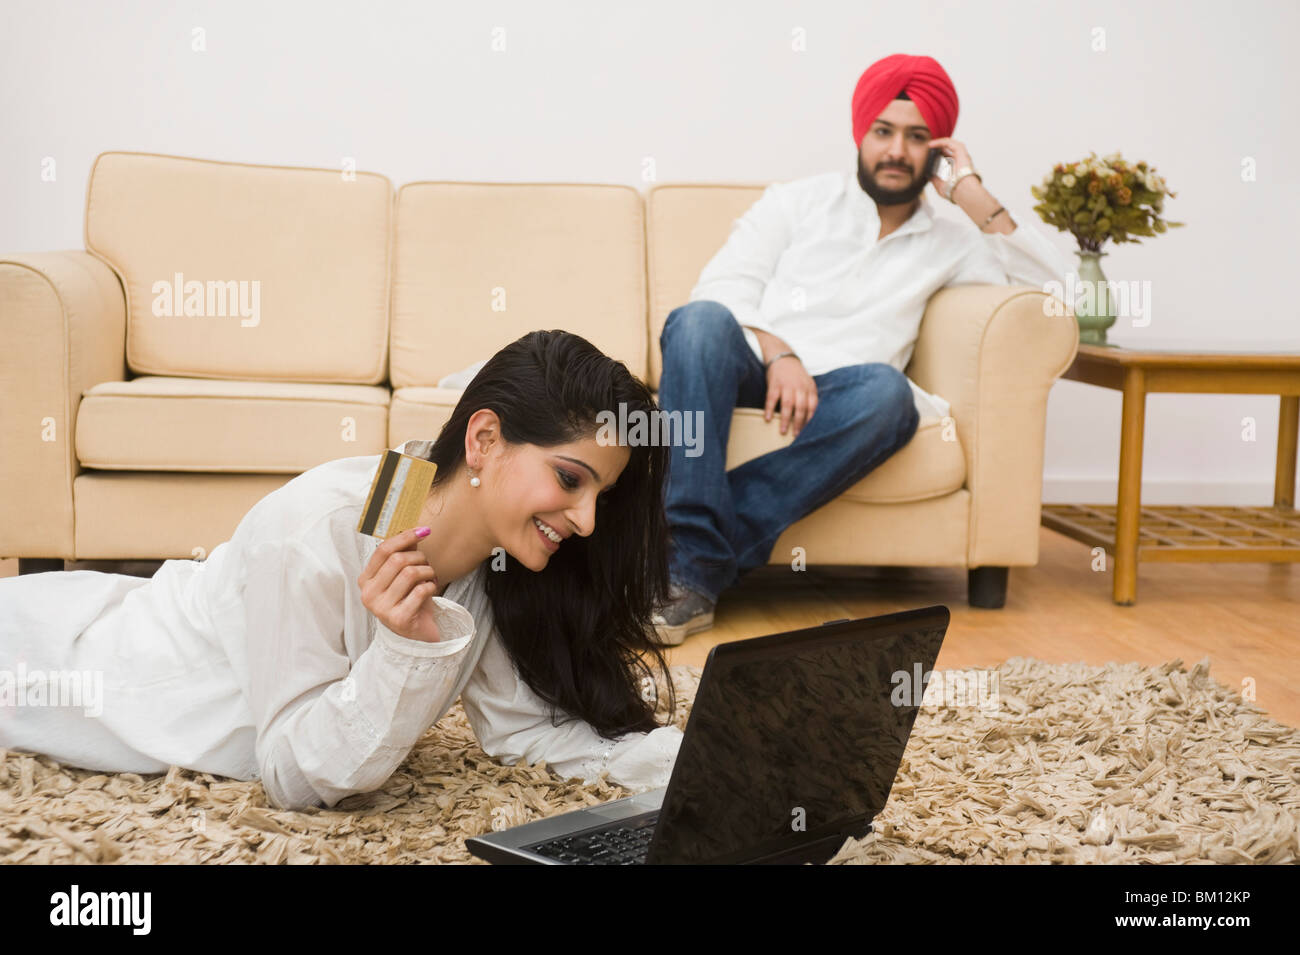 Woman holding a credit card and using a laptop and her husband sitting on couch Stock Photo